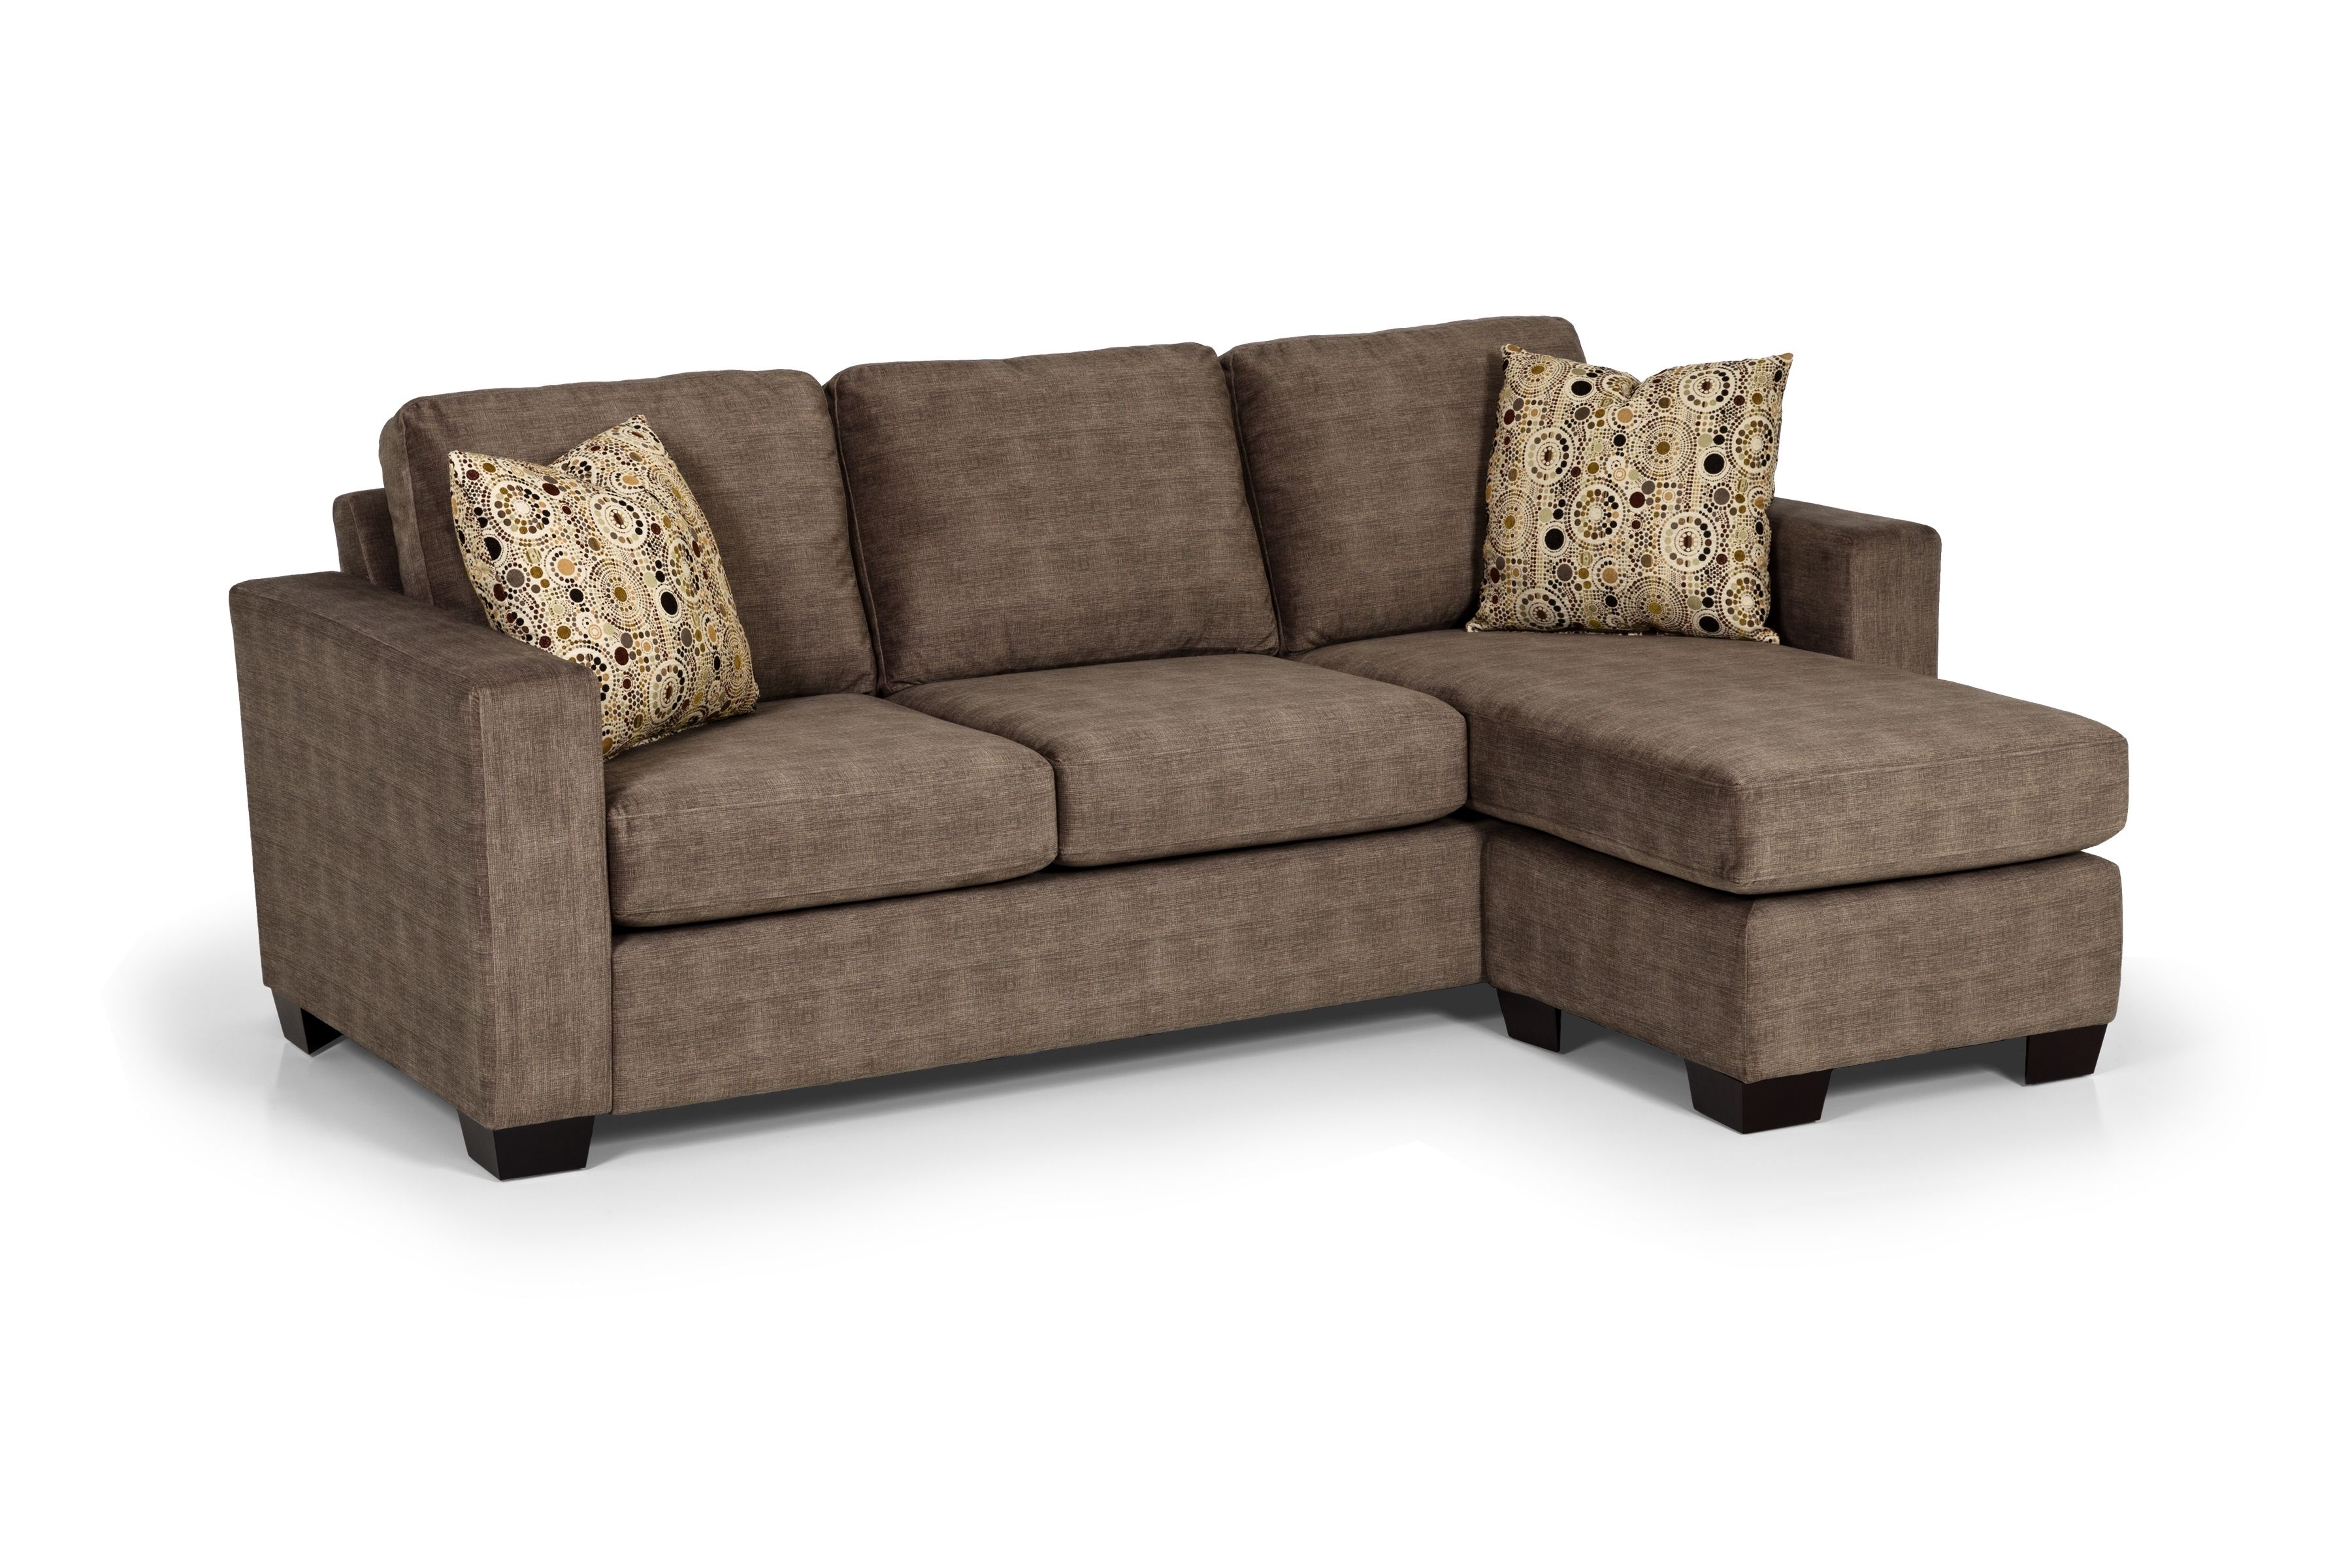 Sectional Sofa Design: Cheap Sectional Sofas Furniture Design Stock With Regard To Sectional Sofas In Stock (View 10 of 10)